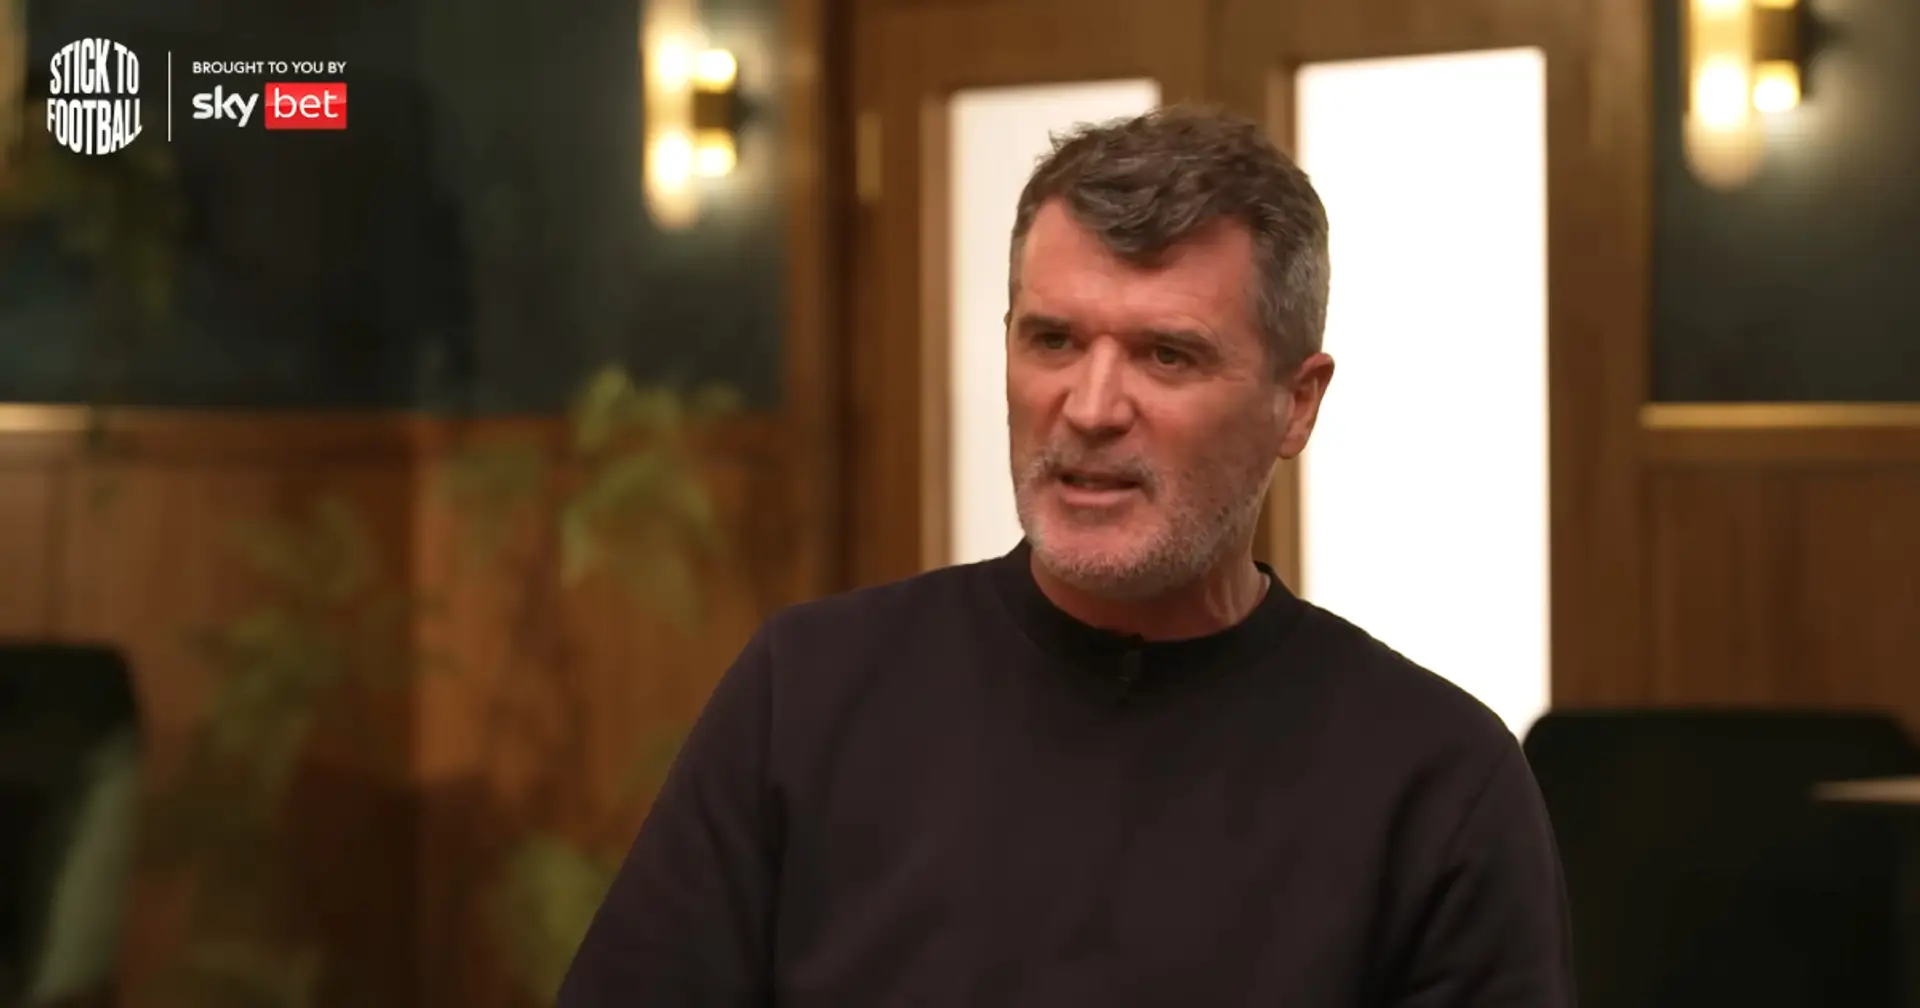 'Who's to say he won't leave in 18 months?': Roy Keane explains why he's worried about Dan Ashworth